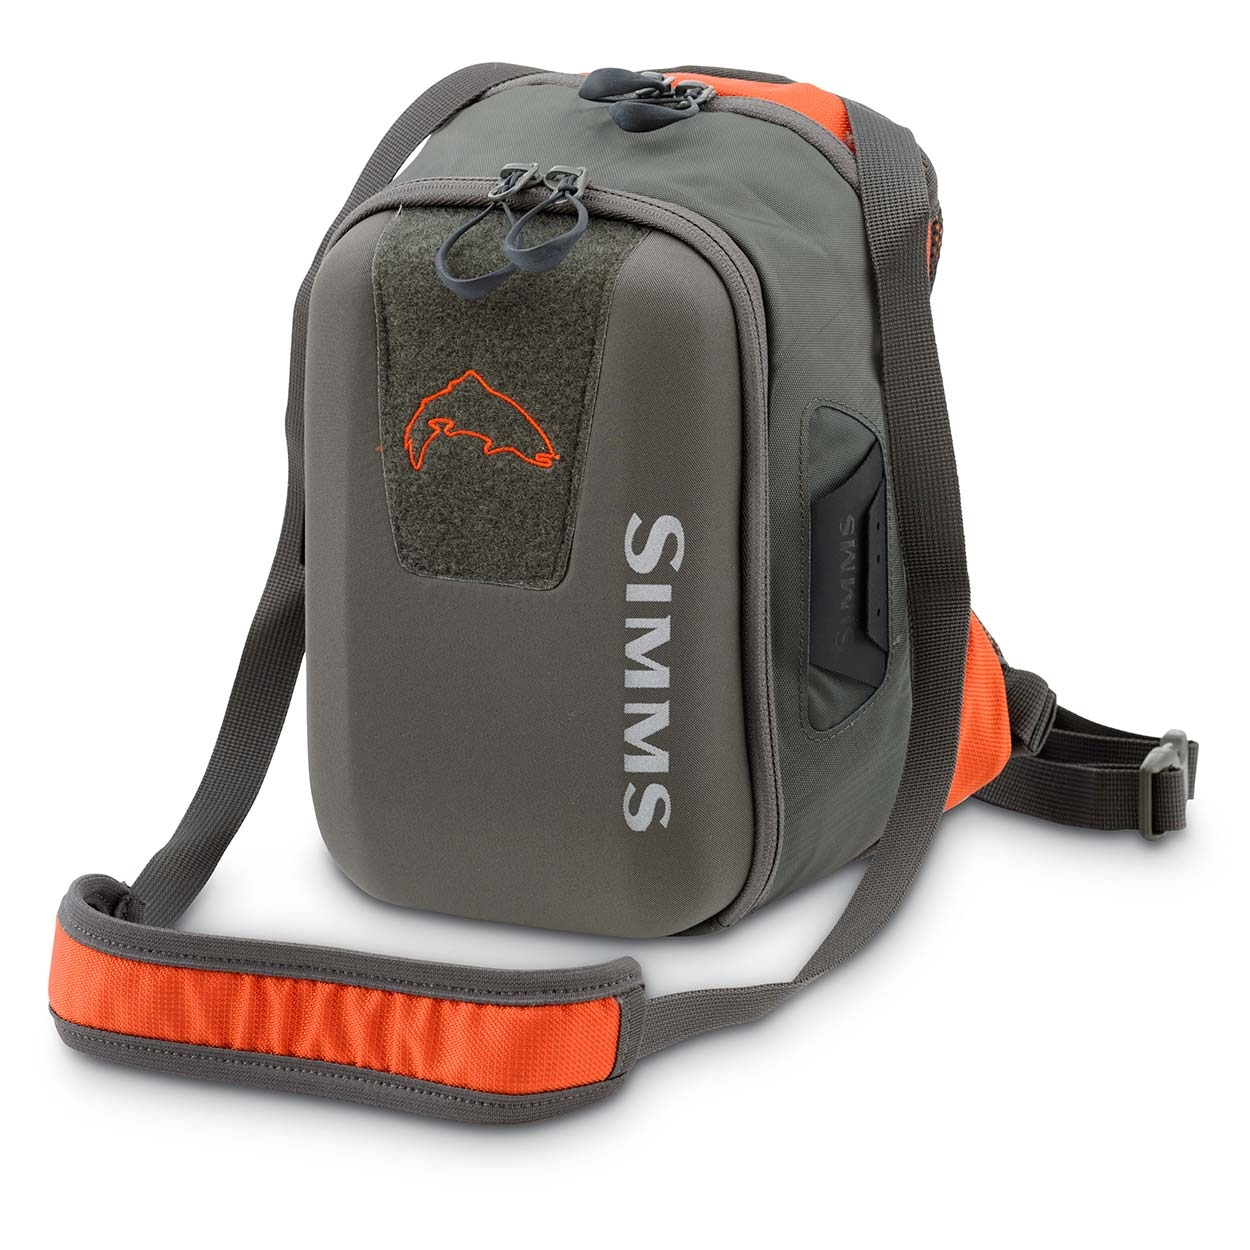 Simms Headwaters Chest Pack - Rucksack / Bags / Luggage